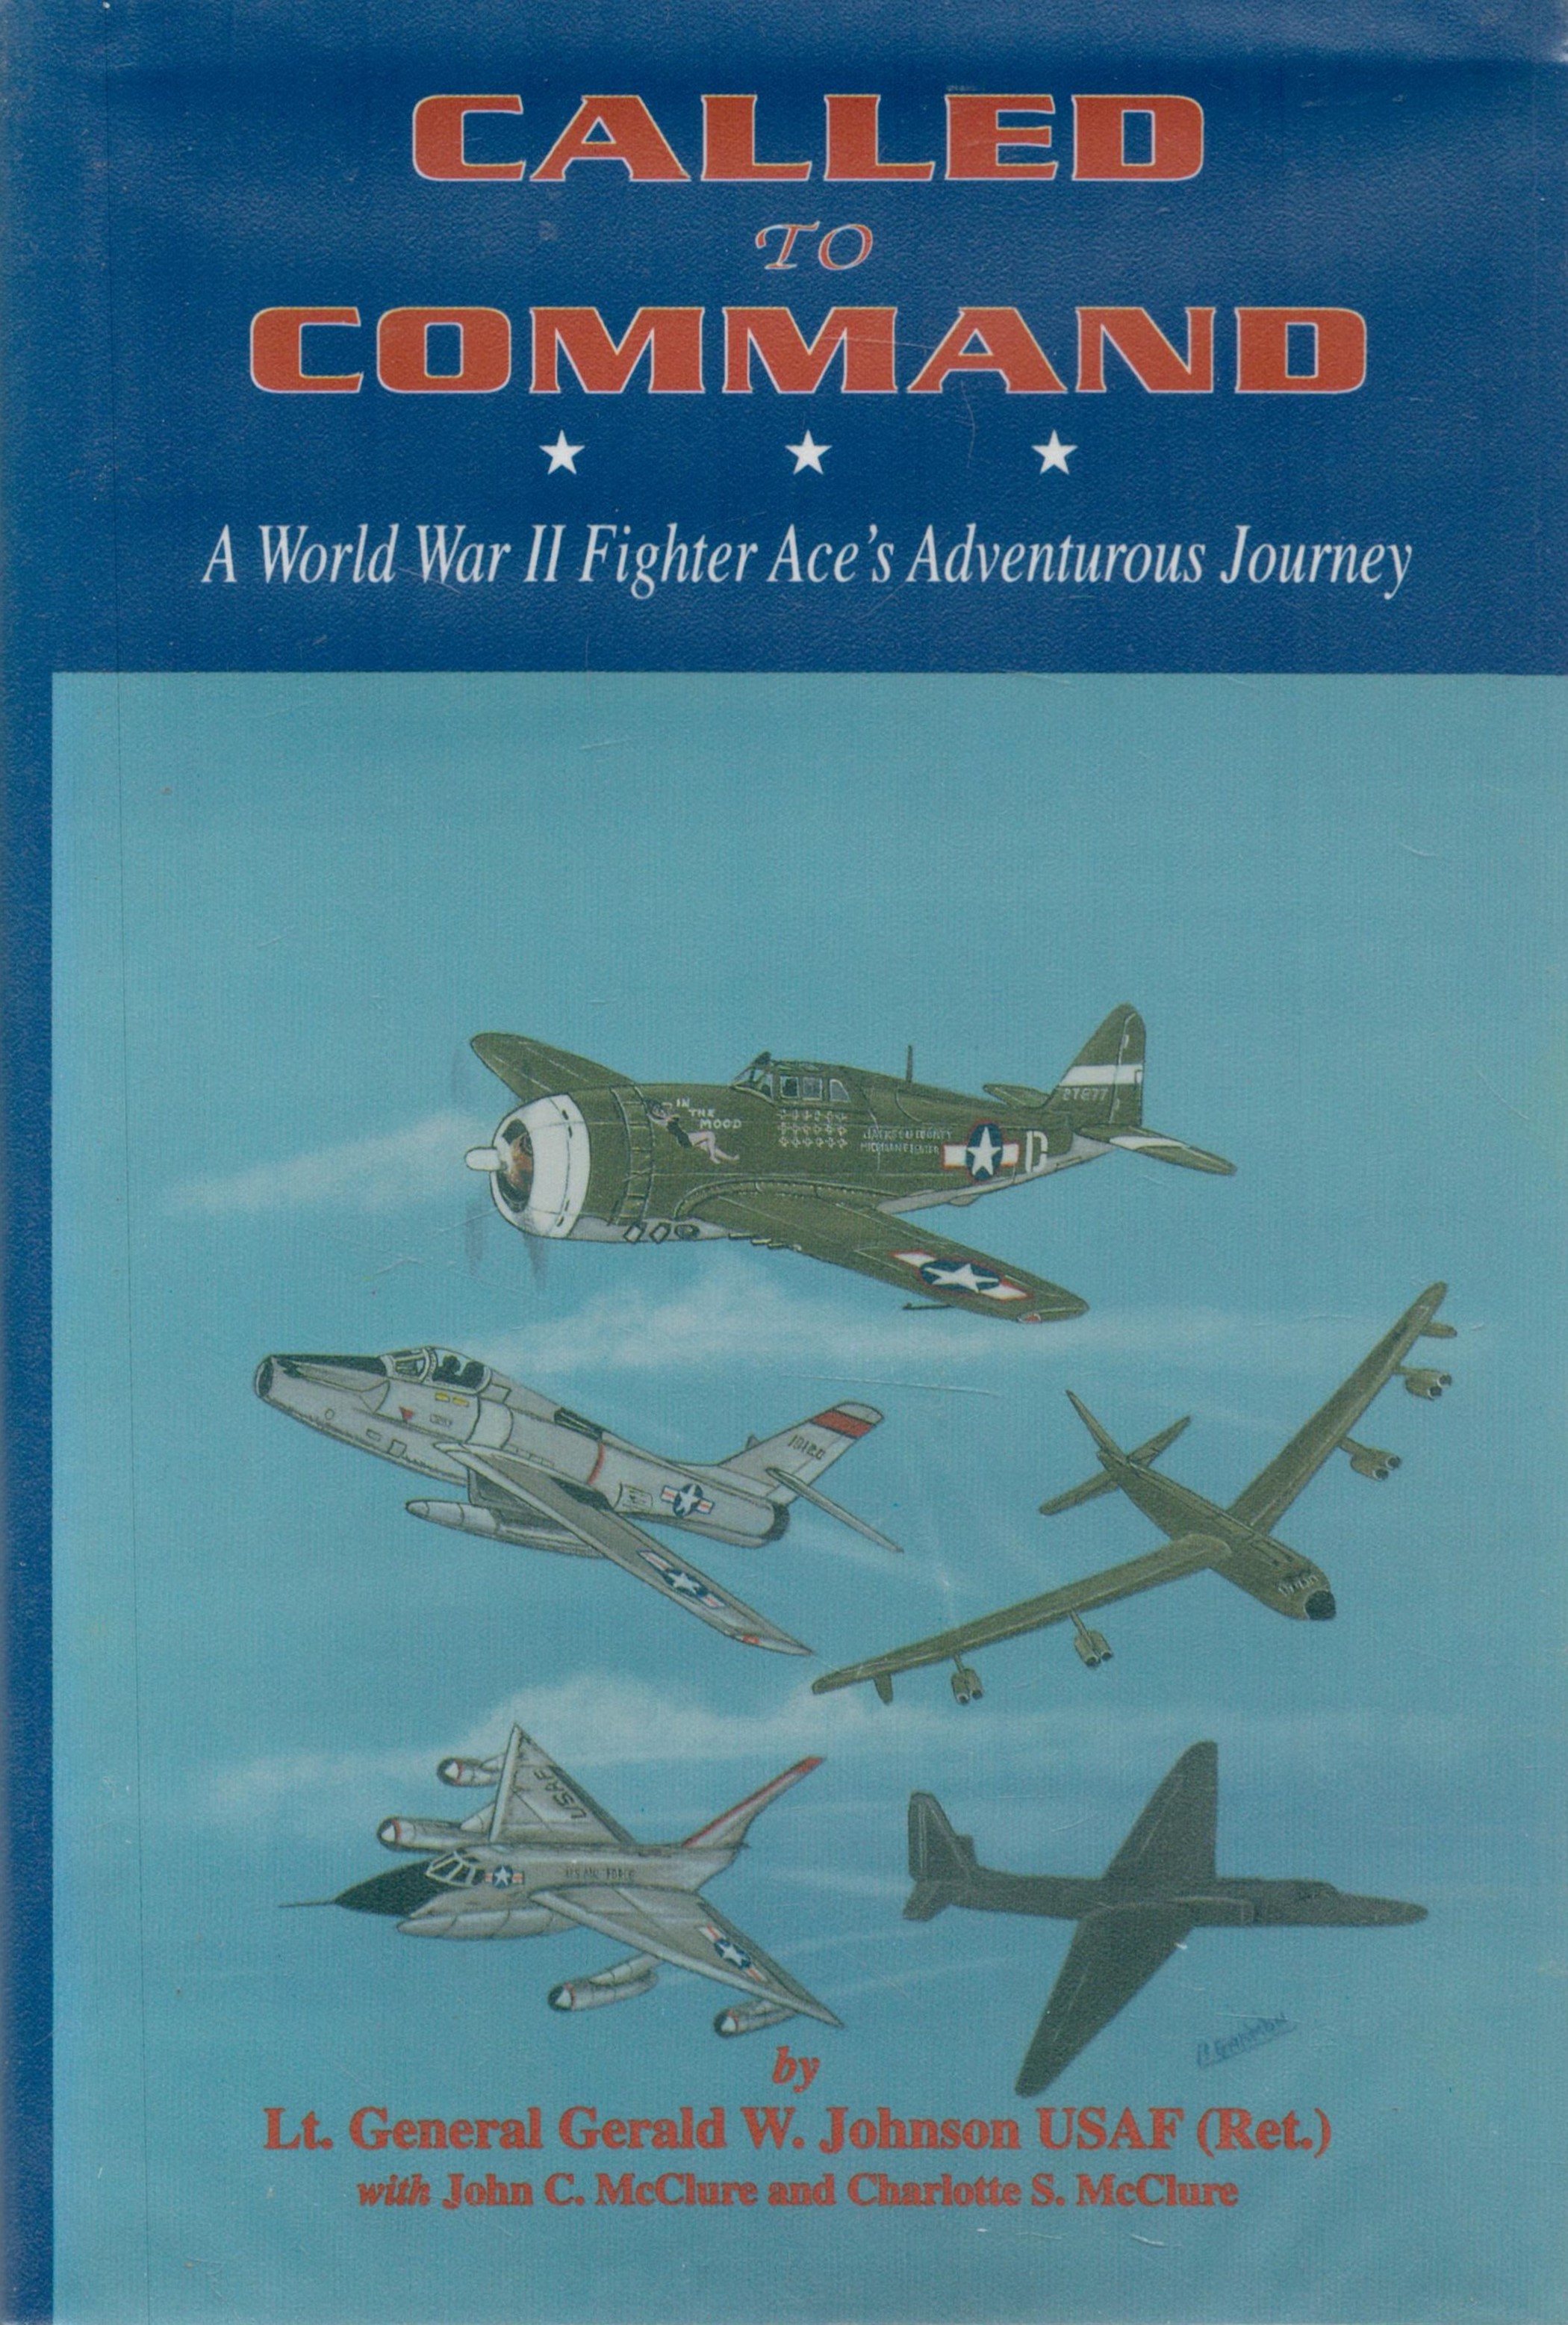 Major General Gerald W Johnson Signed Book Called To Command A World War II Fighter Ace's